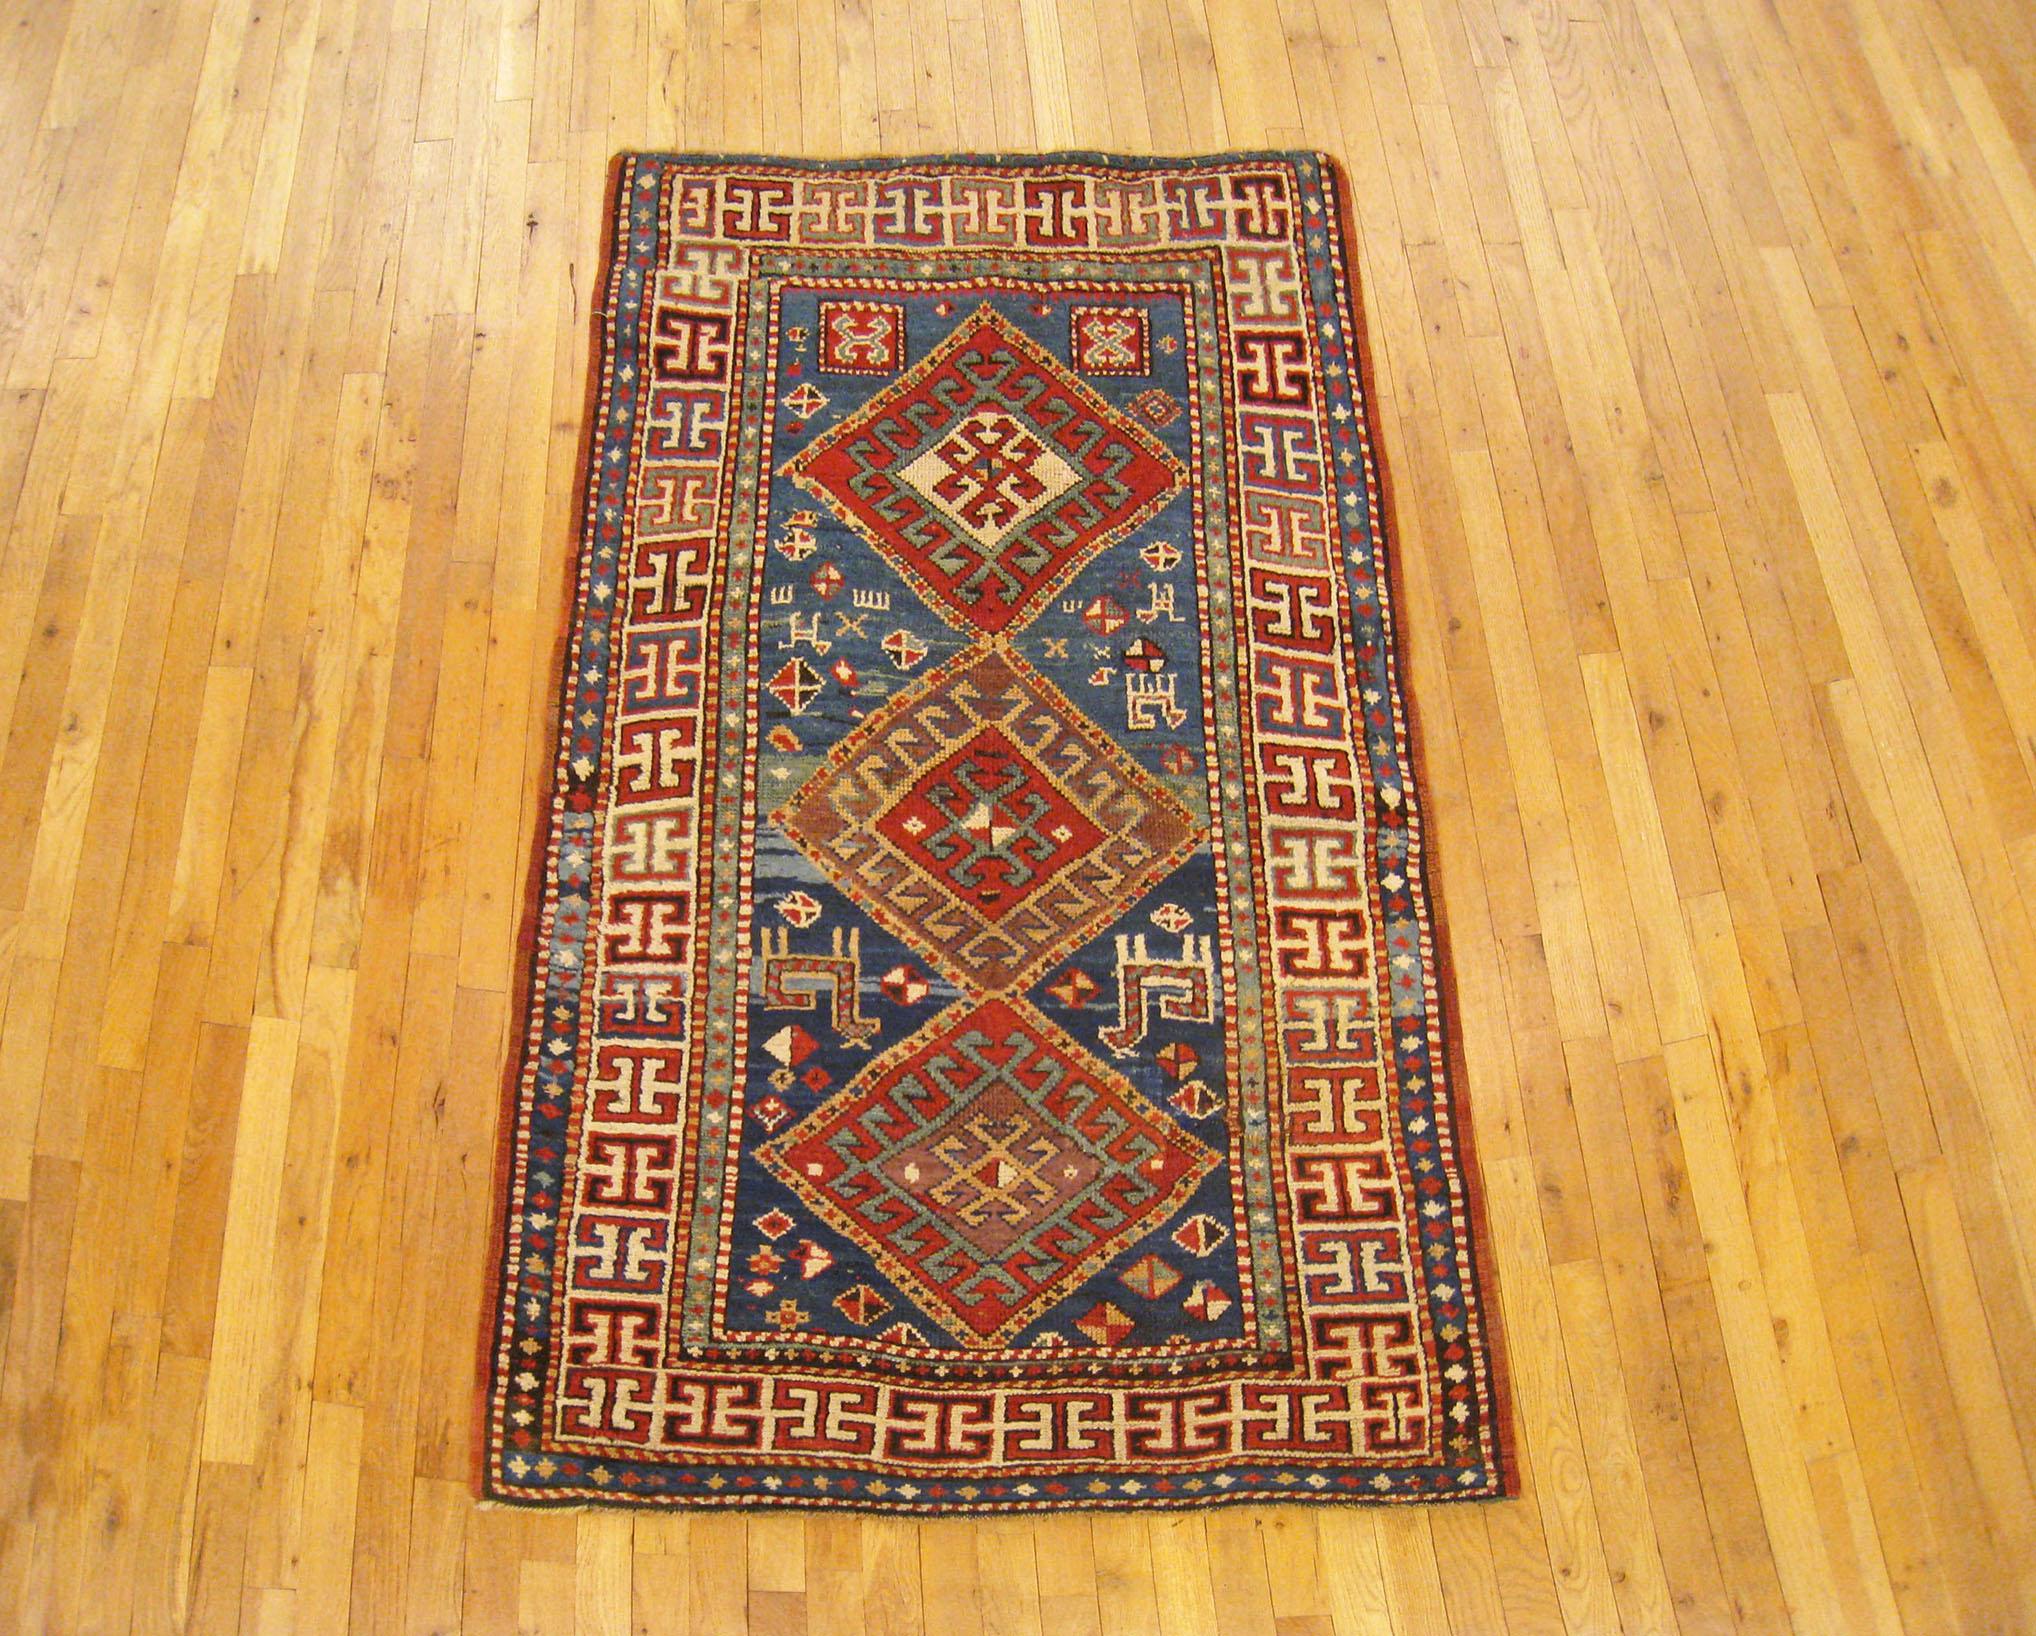 Antique Caucasian Kazak Oriental Carpet, Small size, circa 1900

A one-of-a-kind antique Caucasian Kazak Oriental Carpet, hand-knotted with soft wool pile. This lovely hand-knotted wool rug features multiple medallions in a diamond design on the